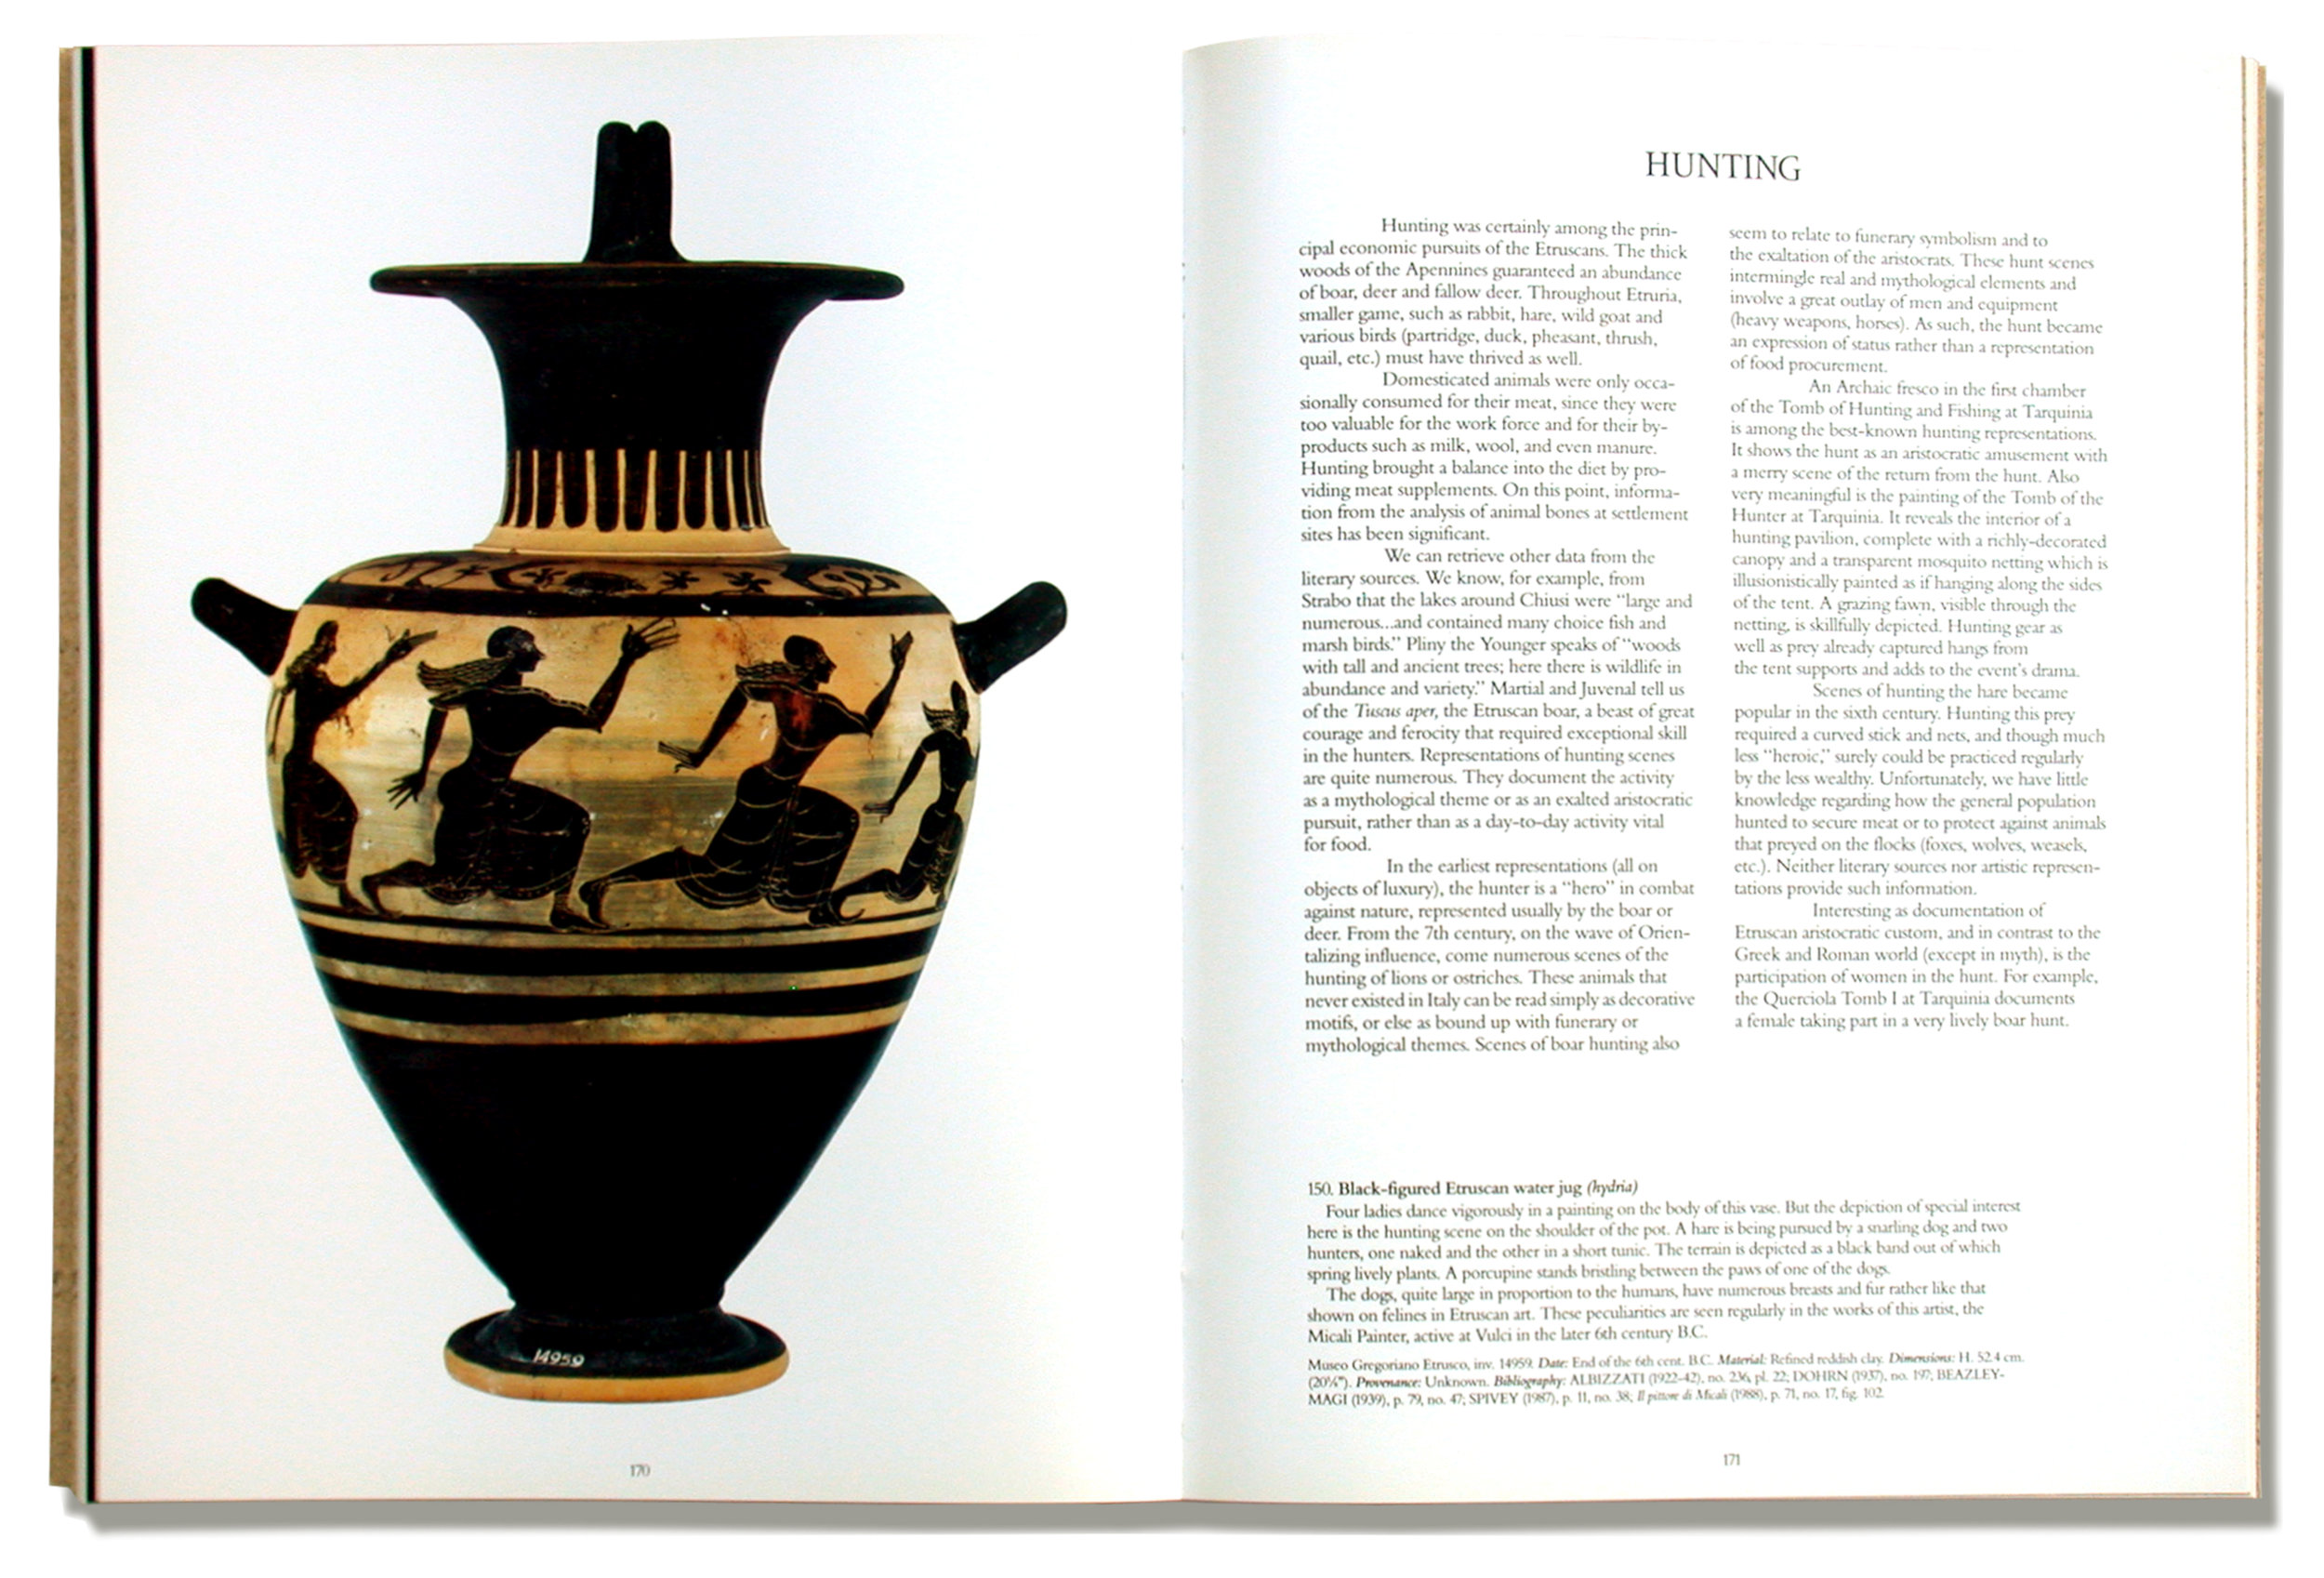  Wonders Series Exhibit  The Etruscans  Exhibition catalog spread  Creative direction and design by Chuck Mitchell 